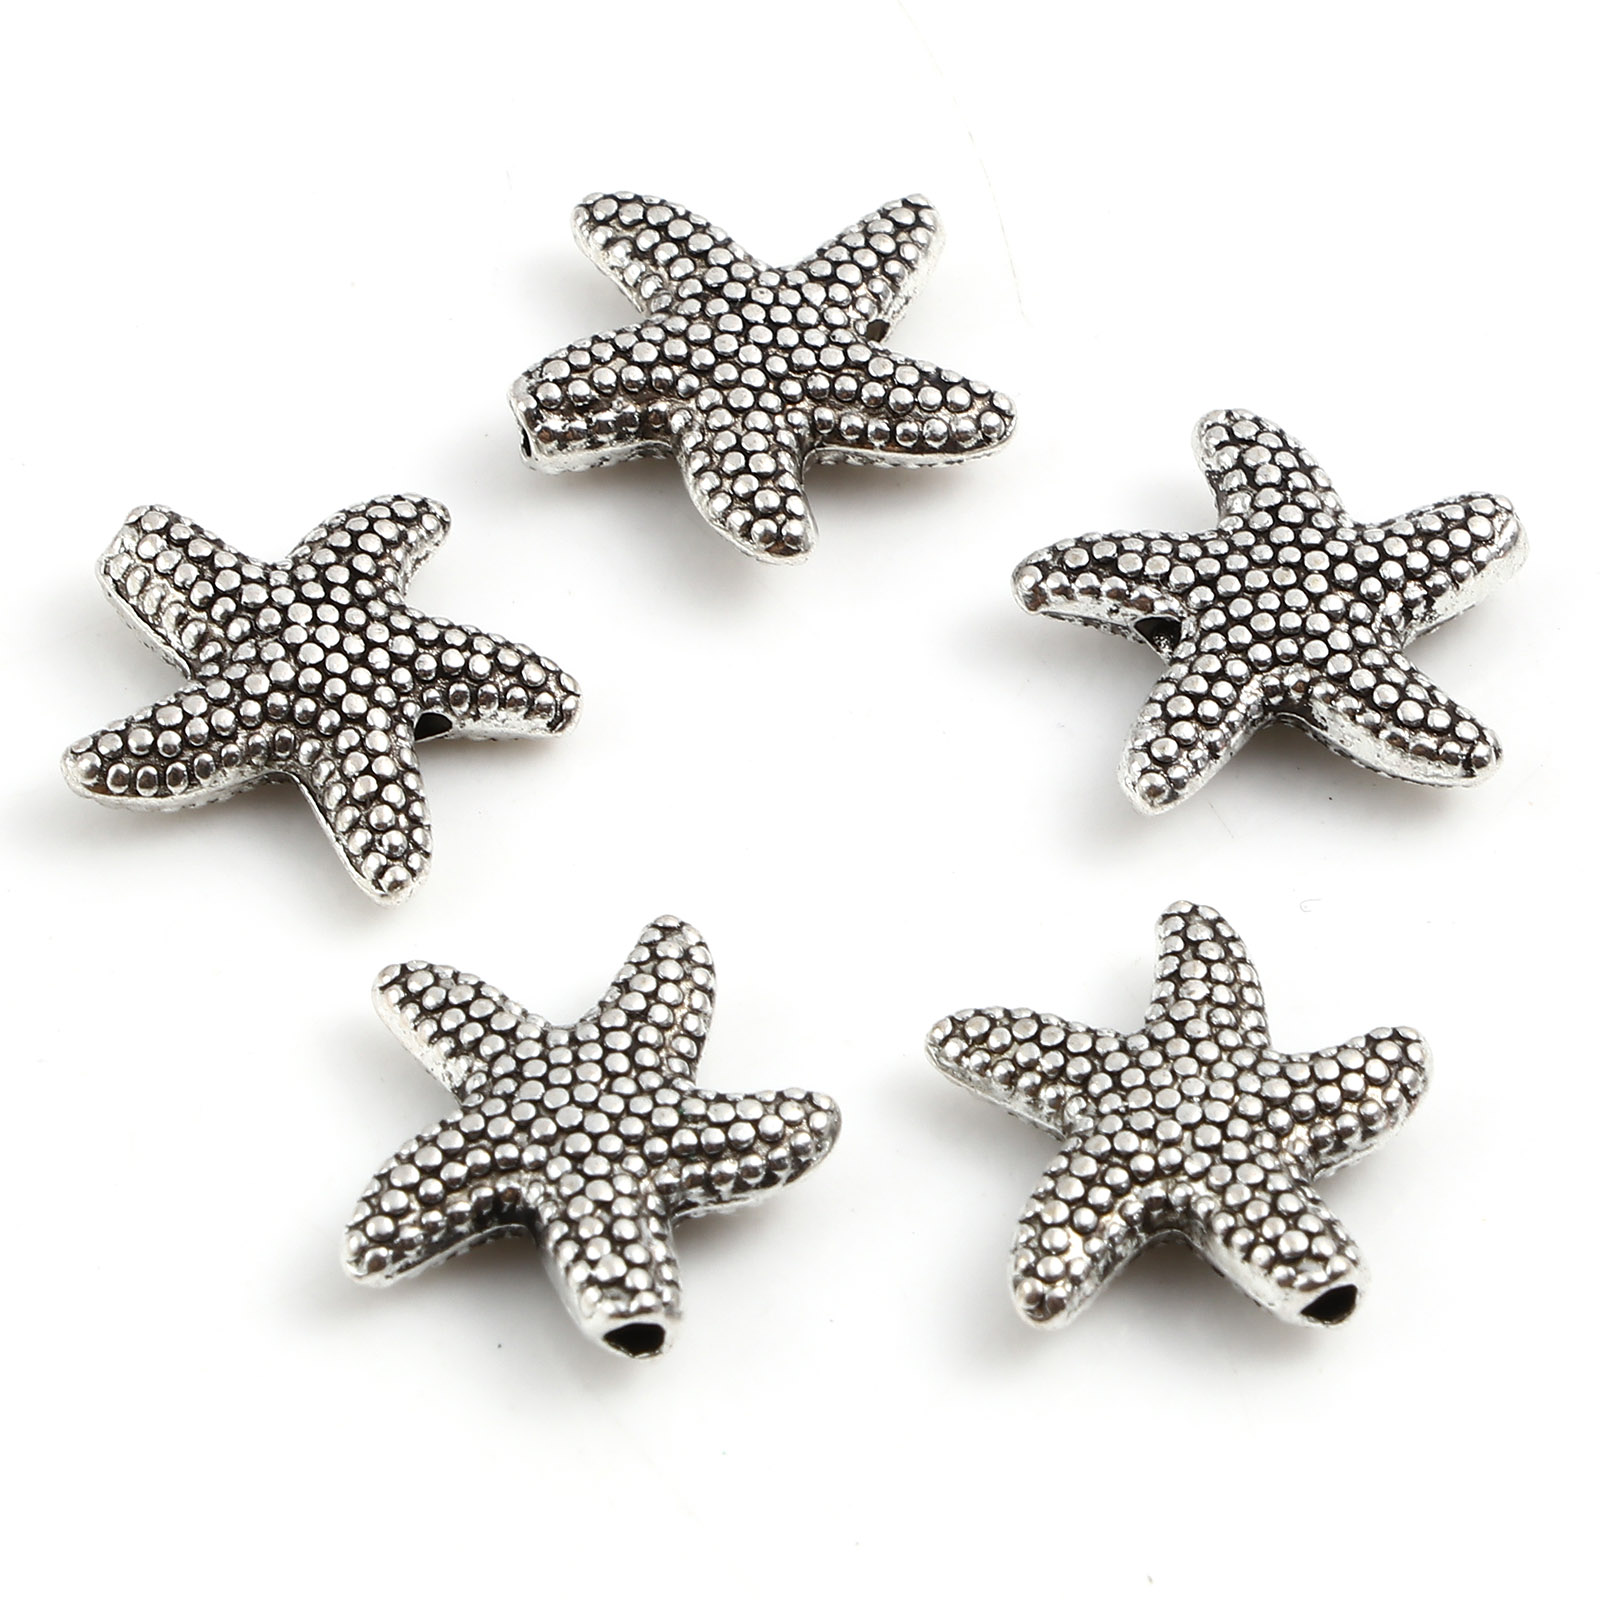 Picture of Zinc Based Alloy Ocean Jewelry Spacer Beads Star Fish Antique Silver Color About 14mm x 13.5mm, Hole: Approx 1.3mm, 20 PCs